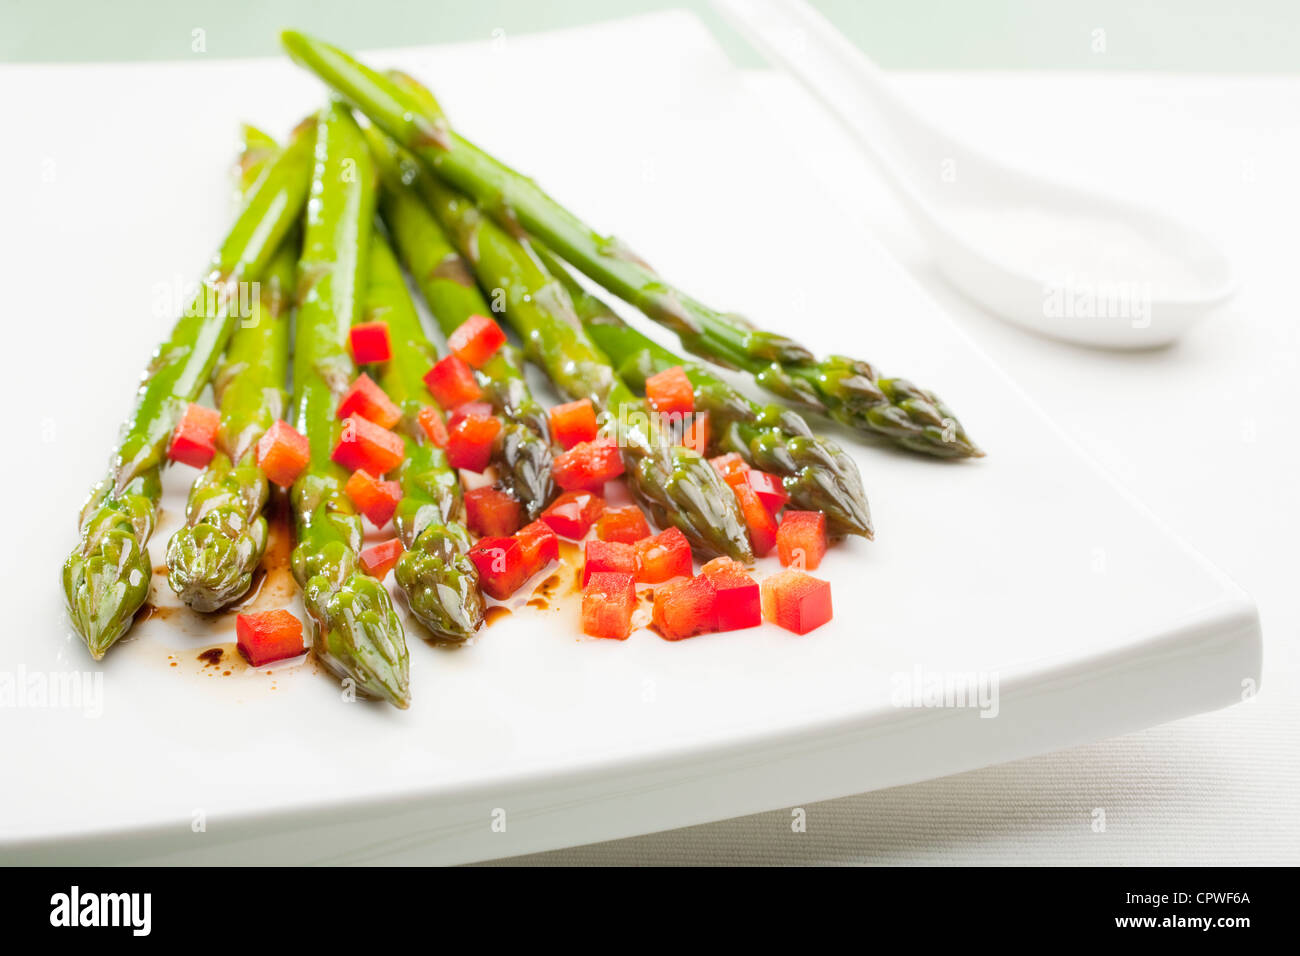 Asparagus with red capsicum amd balsamic vinaigrette Stock Photo - Alamy